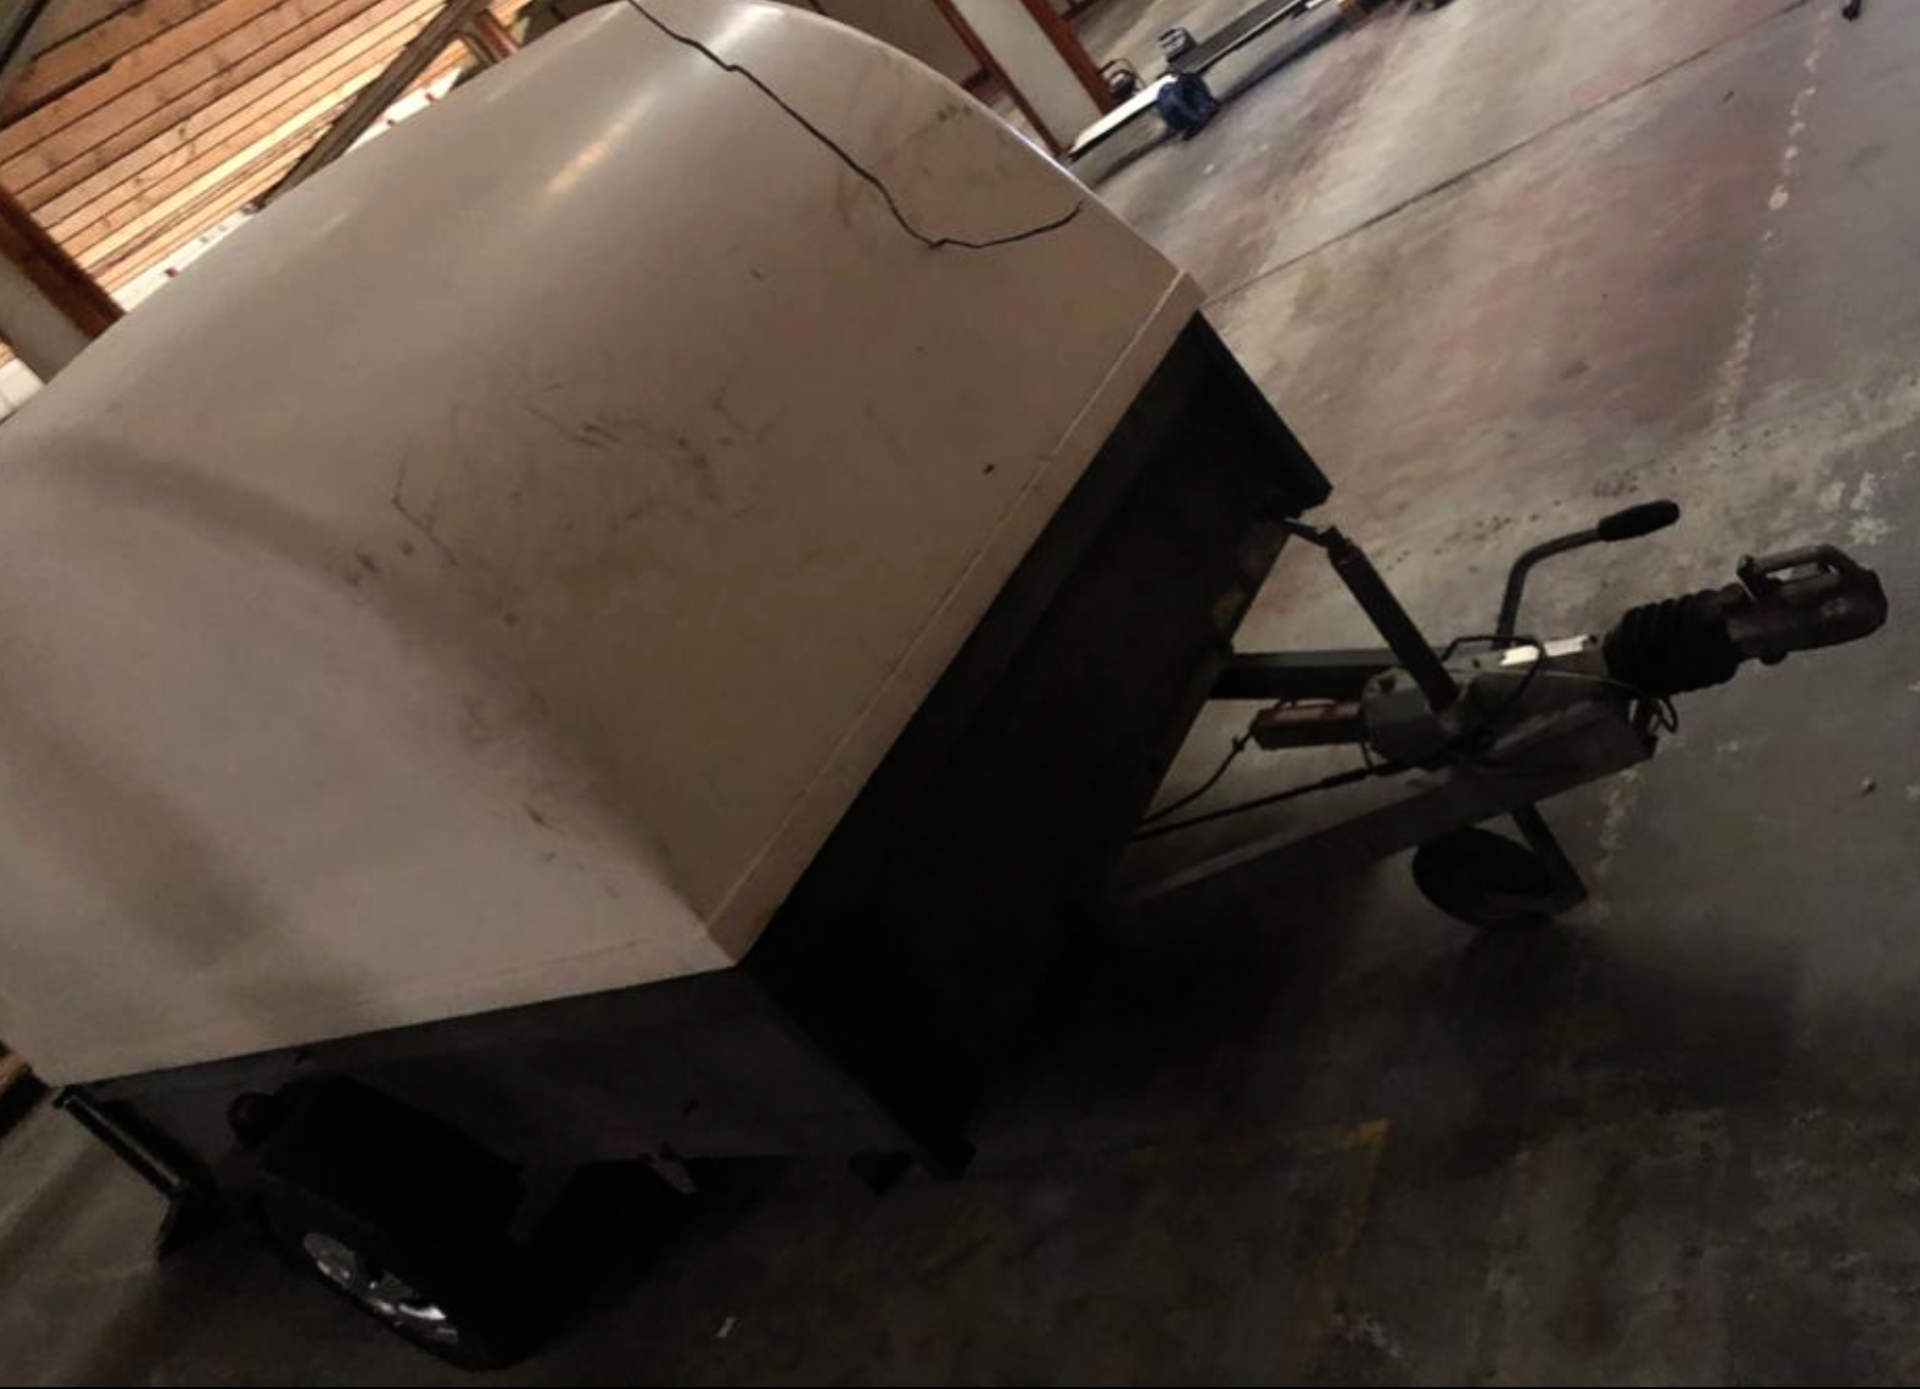 SPECIALIST SINGLE AXLE TOWABLE MOTORBIKE TRANSPORT COVERED TRAILER RAMP *PLUS VAT* - £1500 RESERVE! - Image 3 of 9